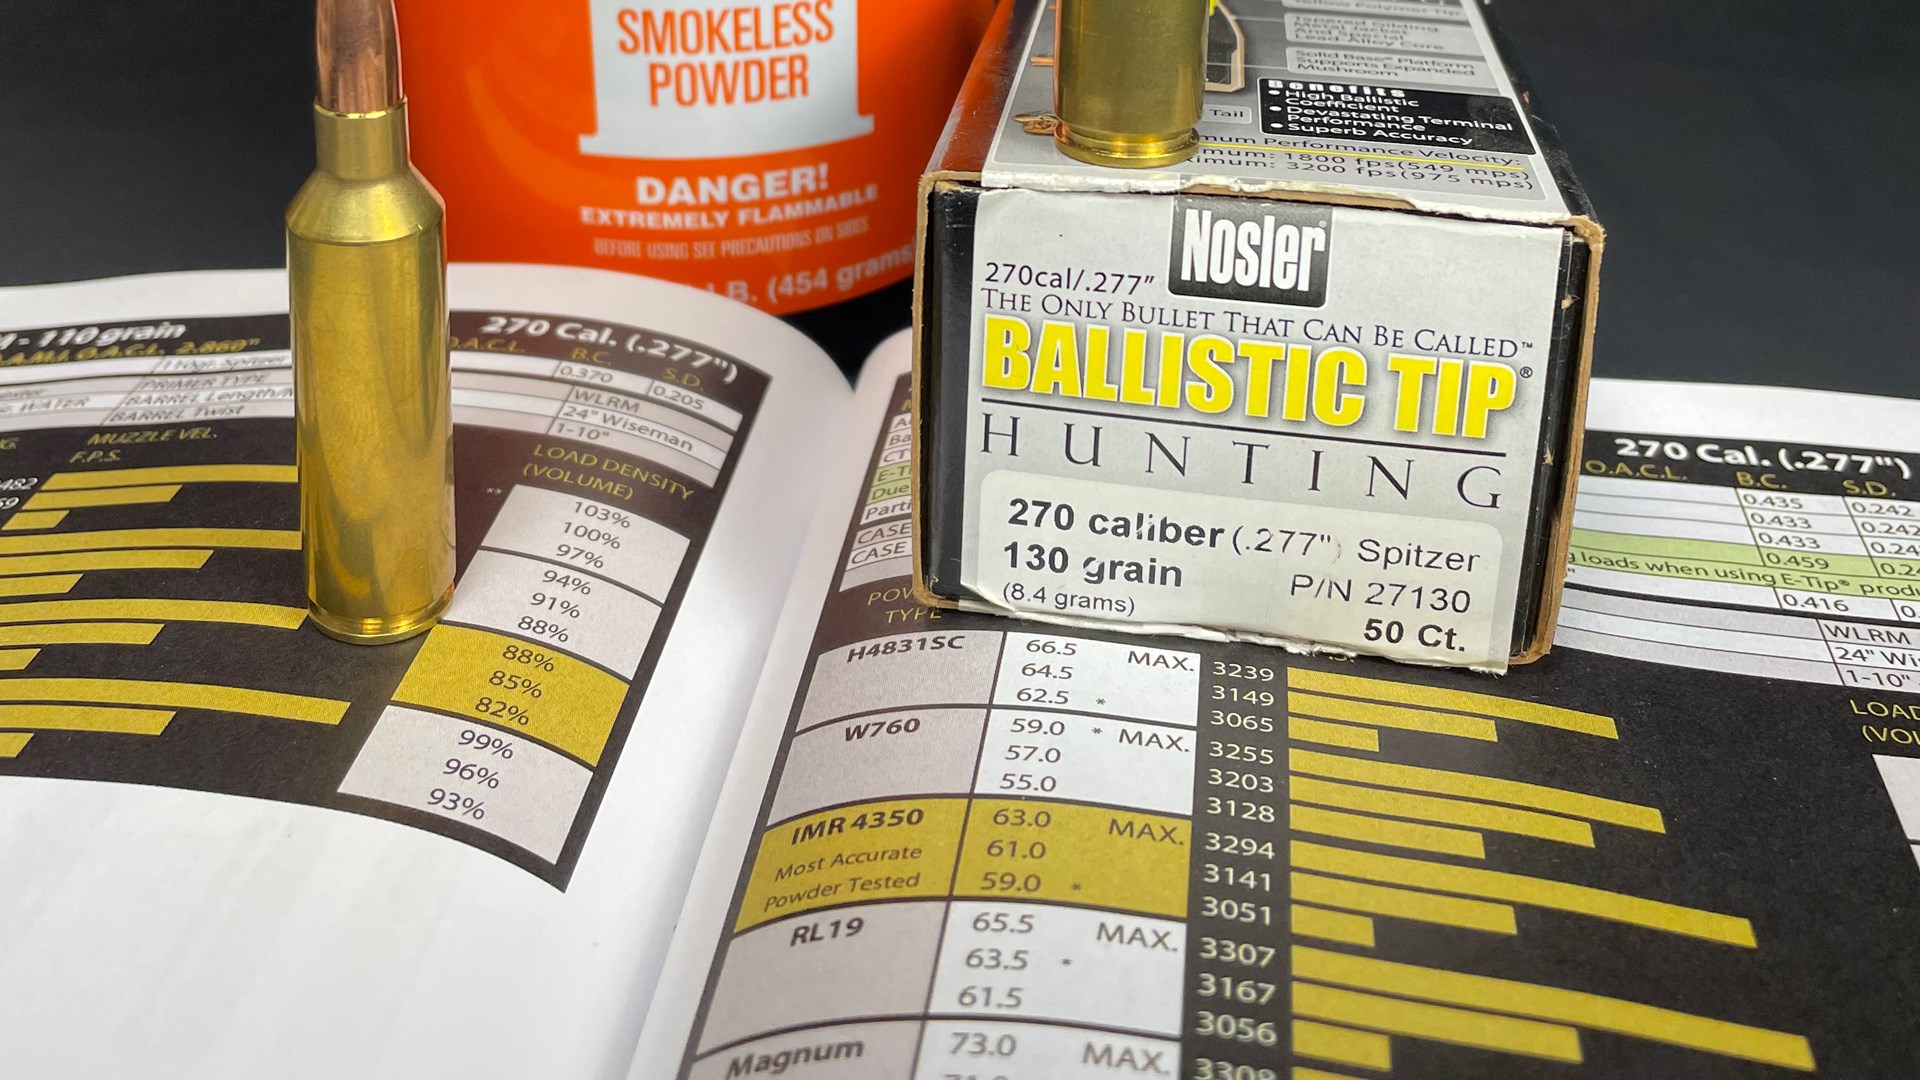 Consult trustworthy sources for reloading data shown here with book and recipe along with smokeless powder bullets and cartrige .270 cal Nosler